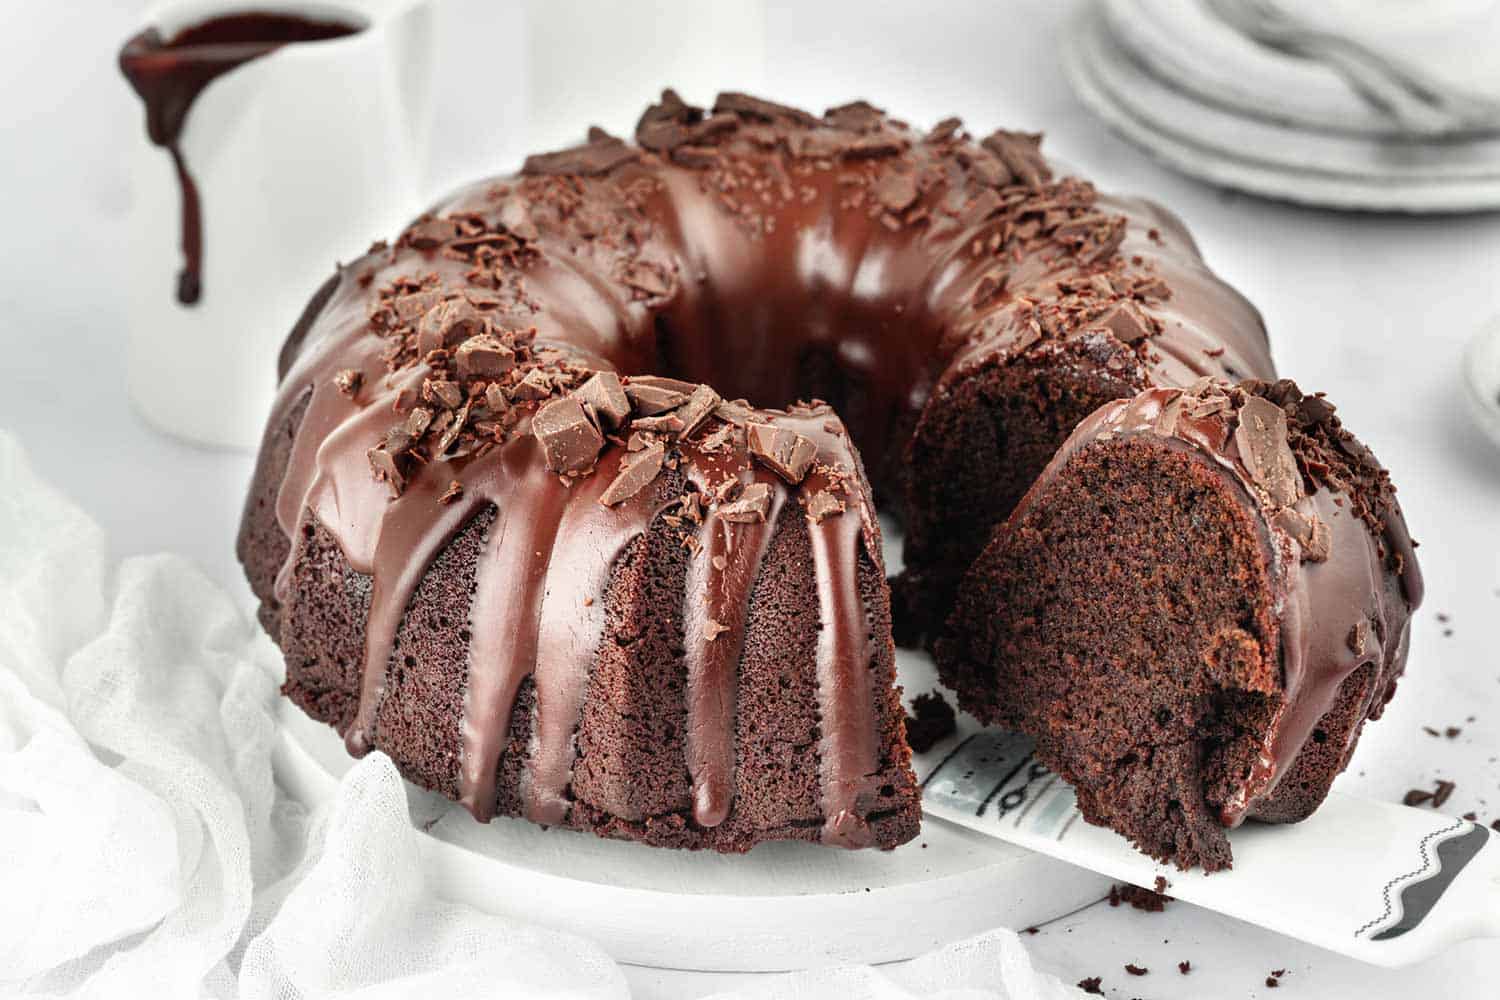 A slice of chocolate bundt cake being served from a cake stand with the whole cake on it.